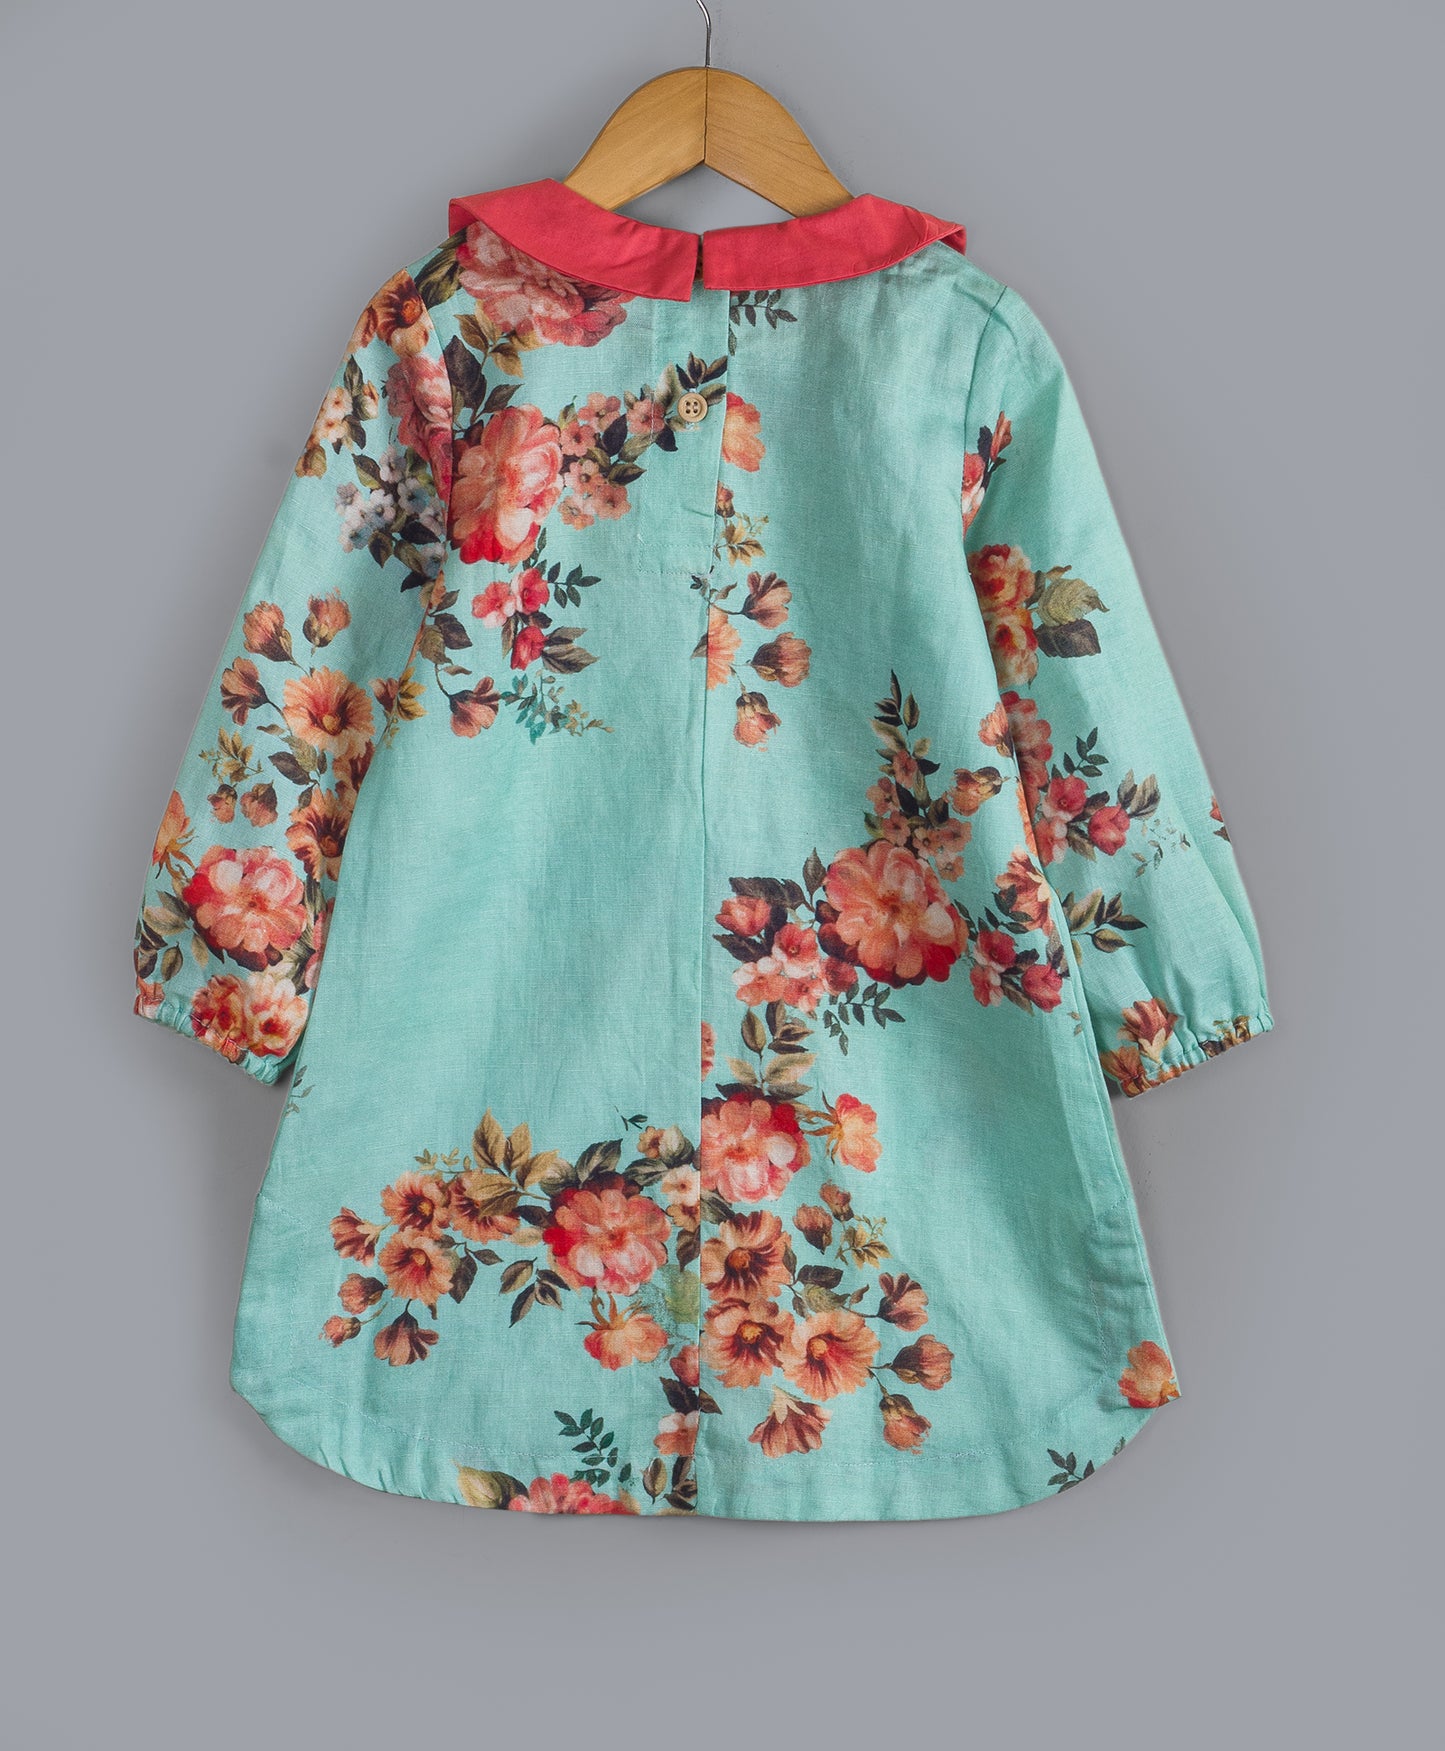 Vintage floral print dress with contrast collar -Green